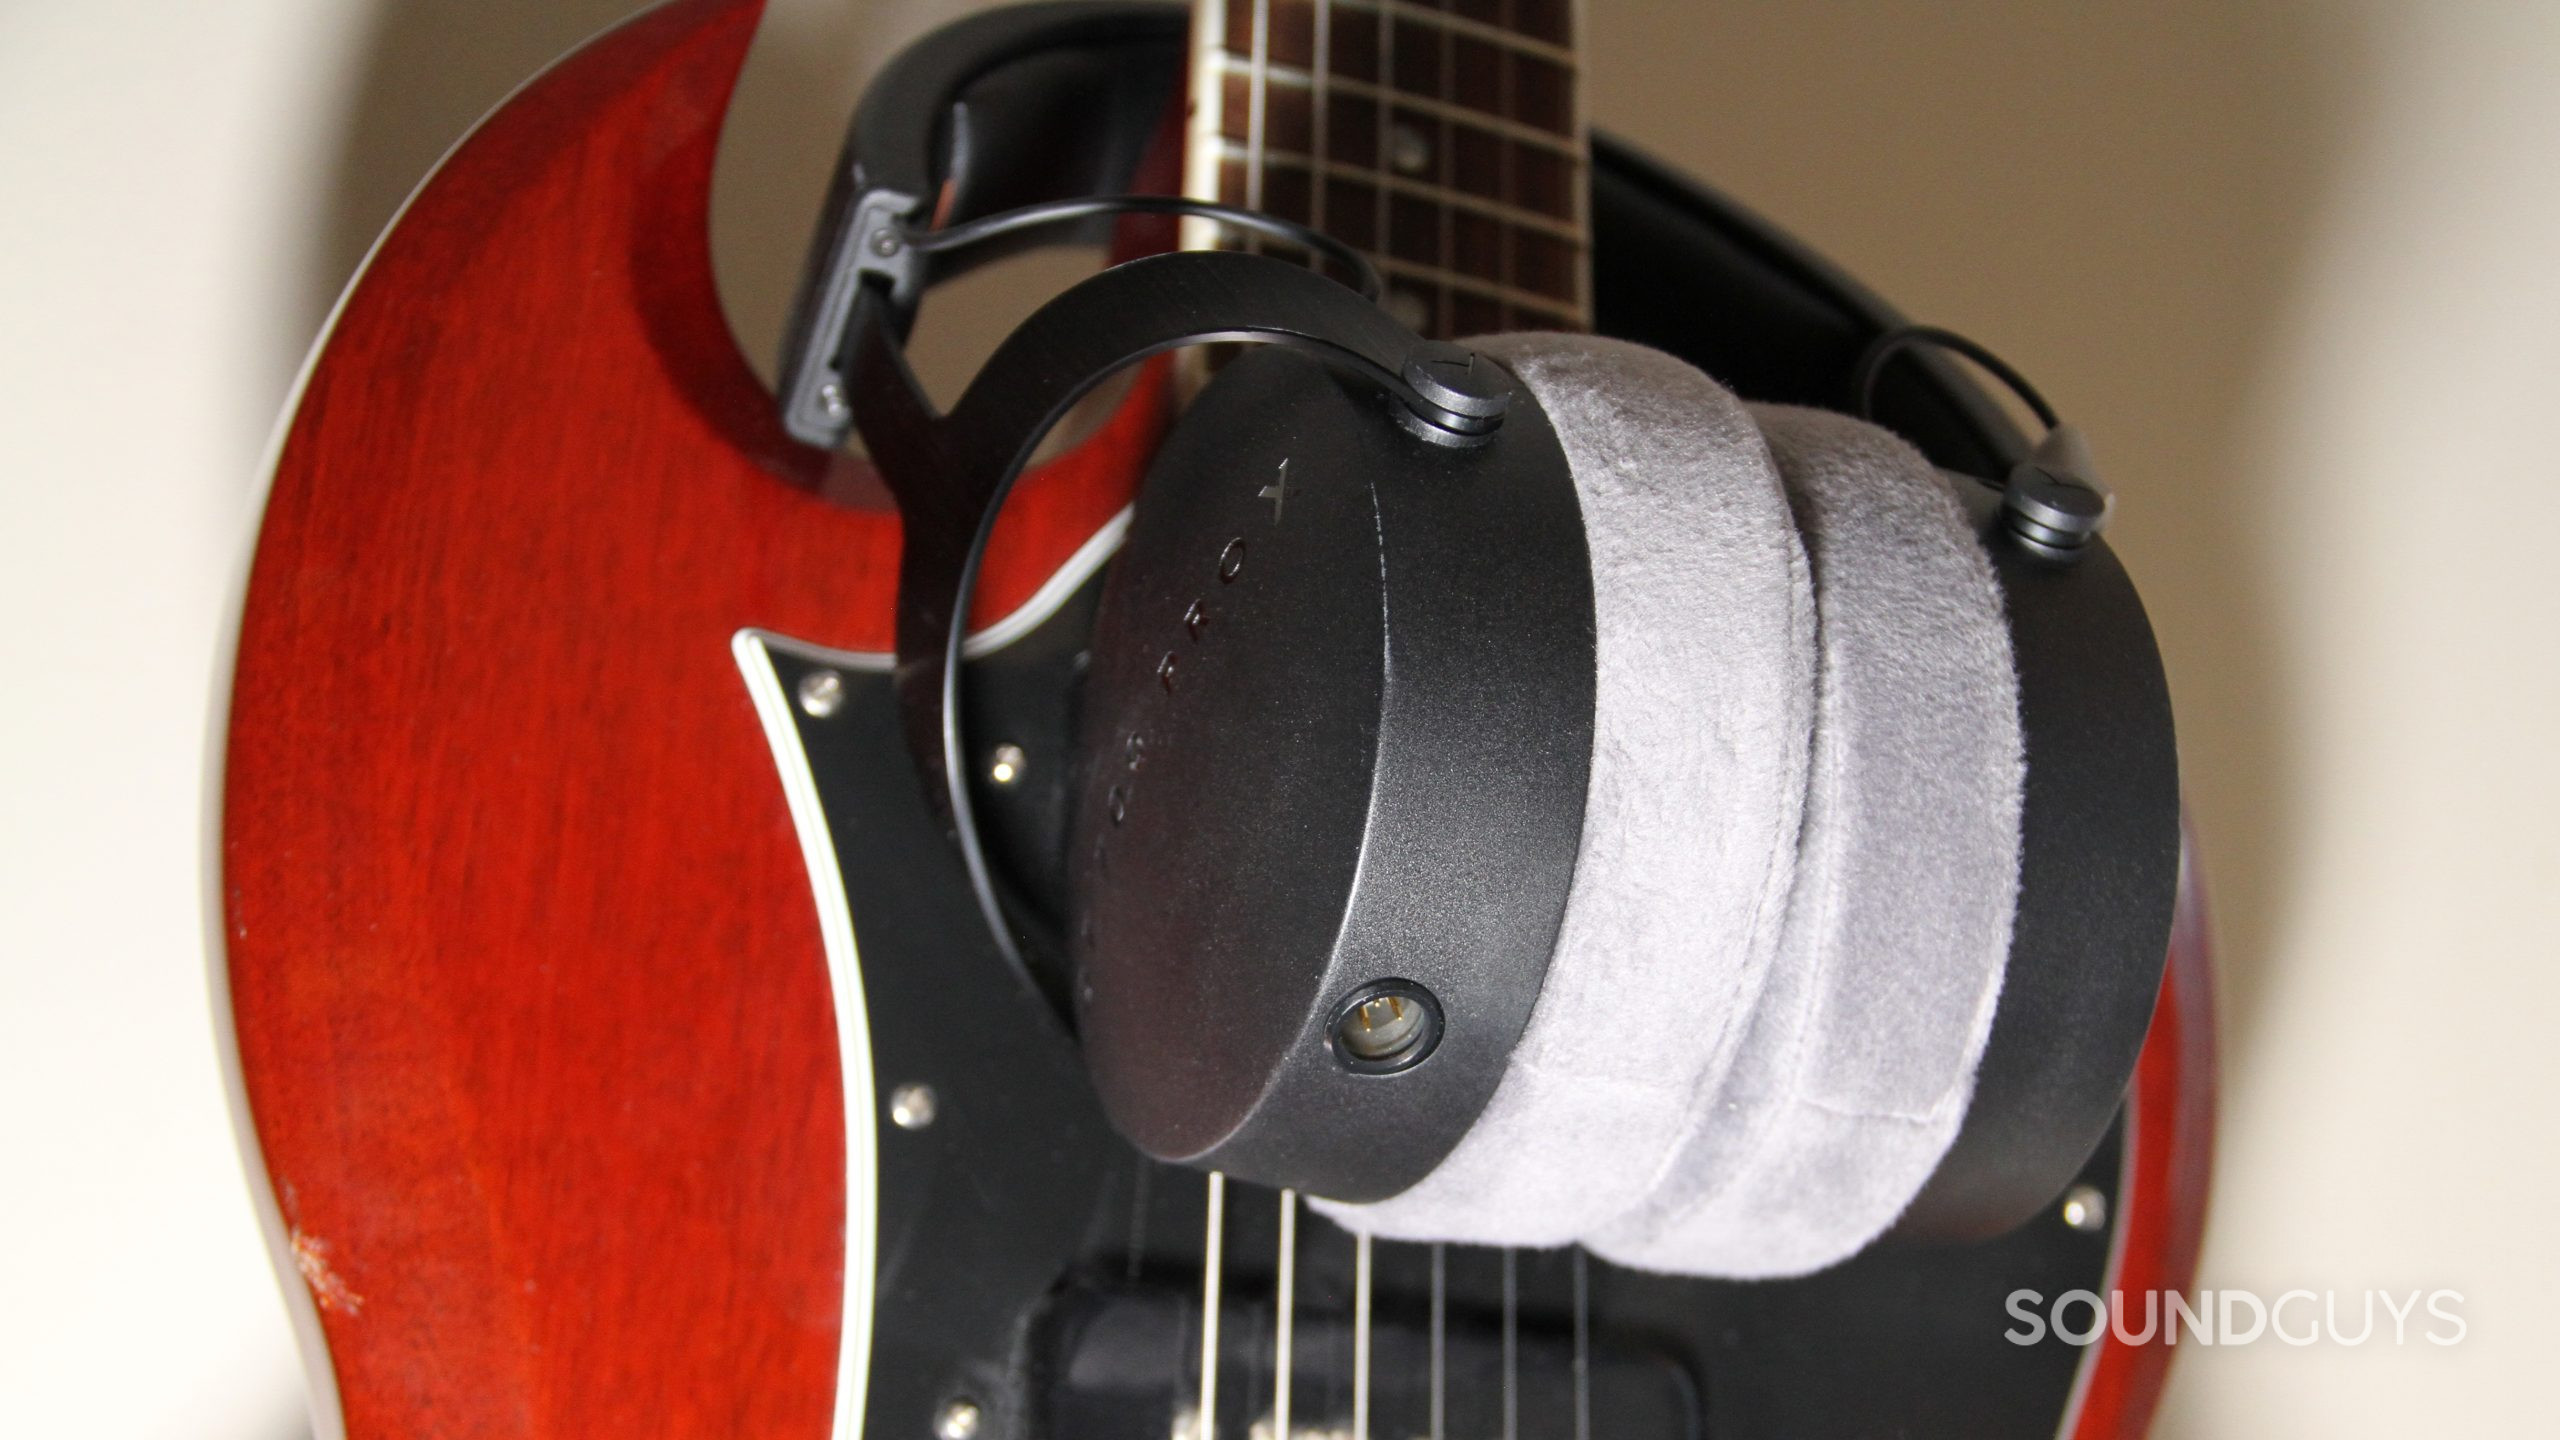 The Beyerdynamic DT 700 Pro X sits around the neck of a red guitar showing the cable connector.